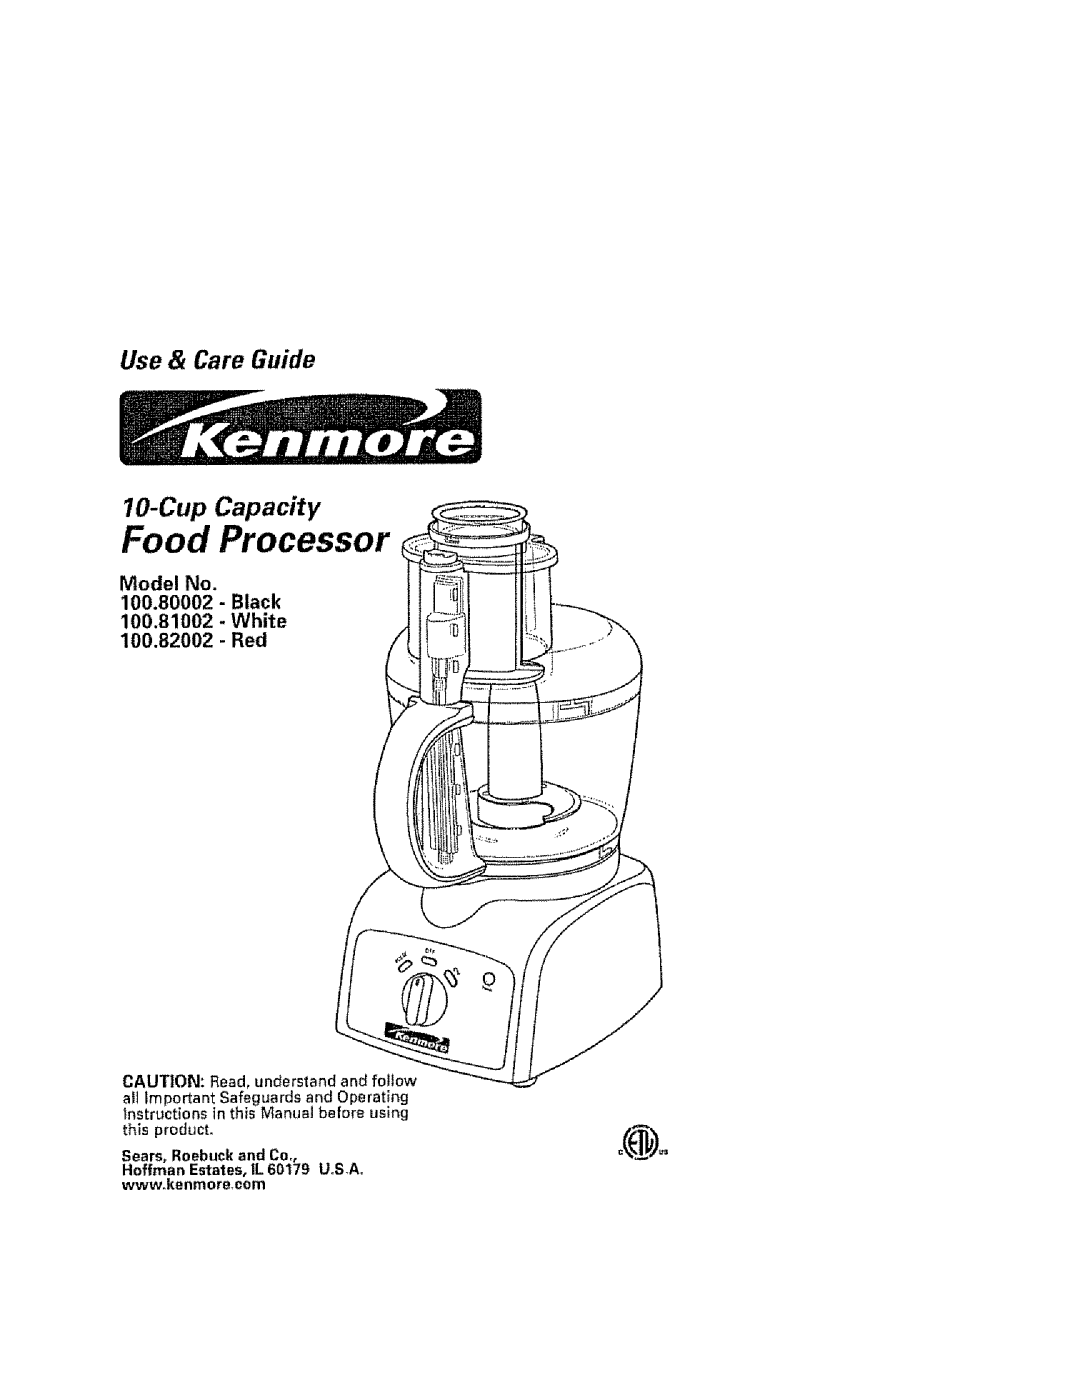 Kenmore manual Food Processor, Cup Capacity, Use & Care Guide, Model No 100.80002 - Black 100.81002 - White, Red 